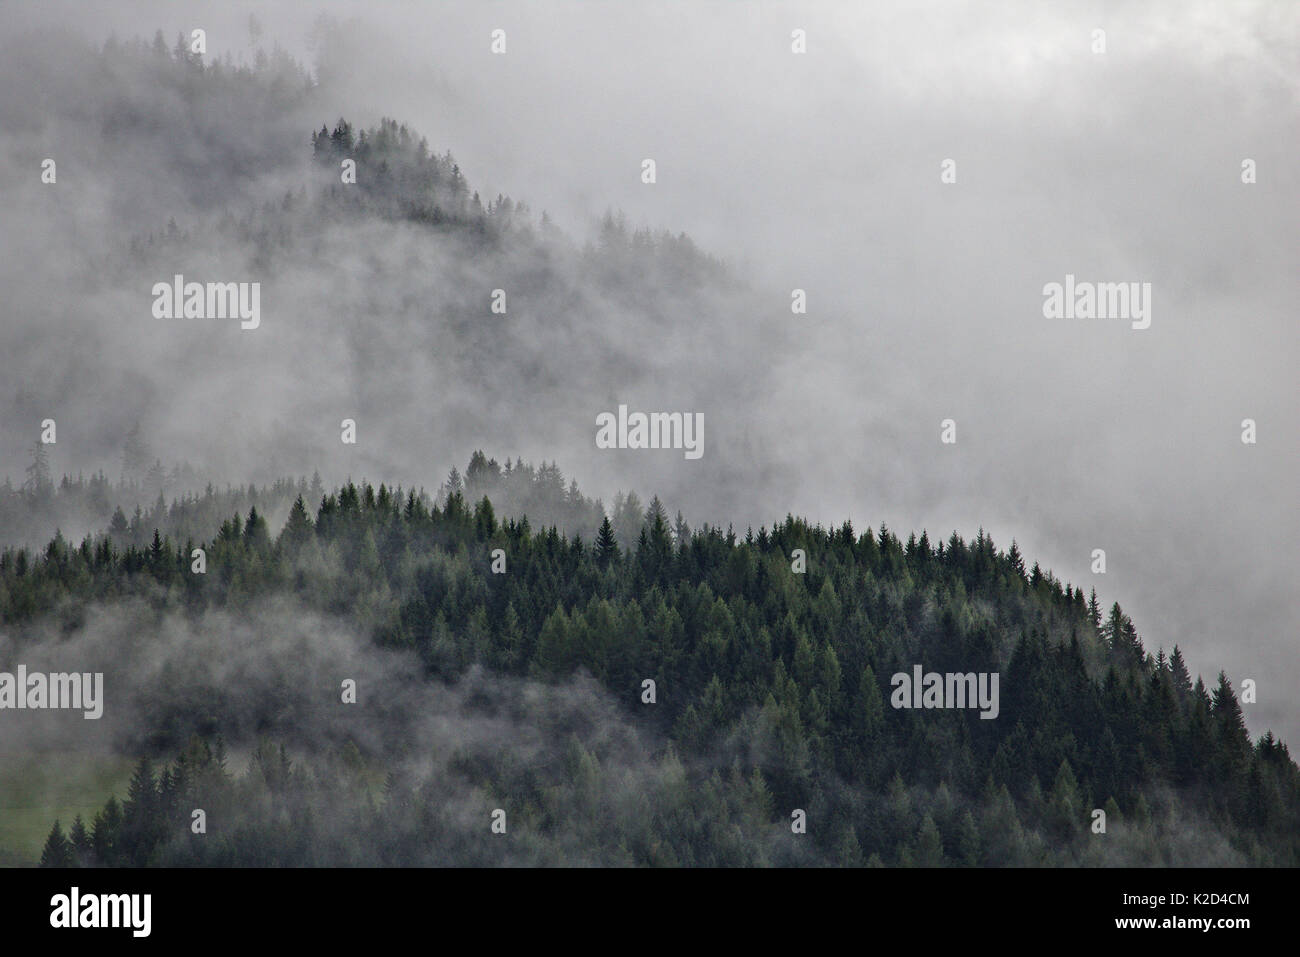 Mountain ridges in the Austrian Alps party obscured by mist and clouds Stock Photo